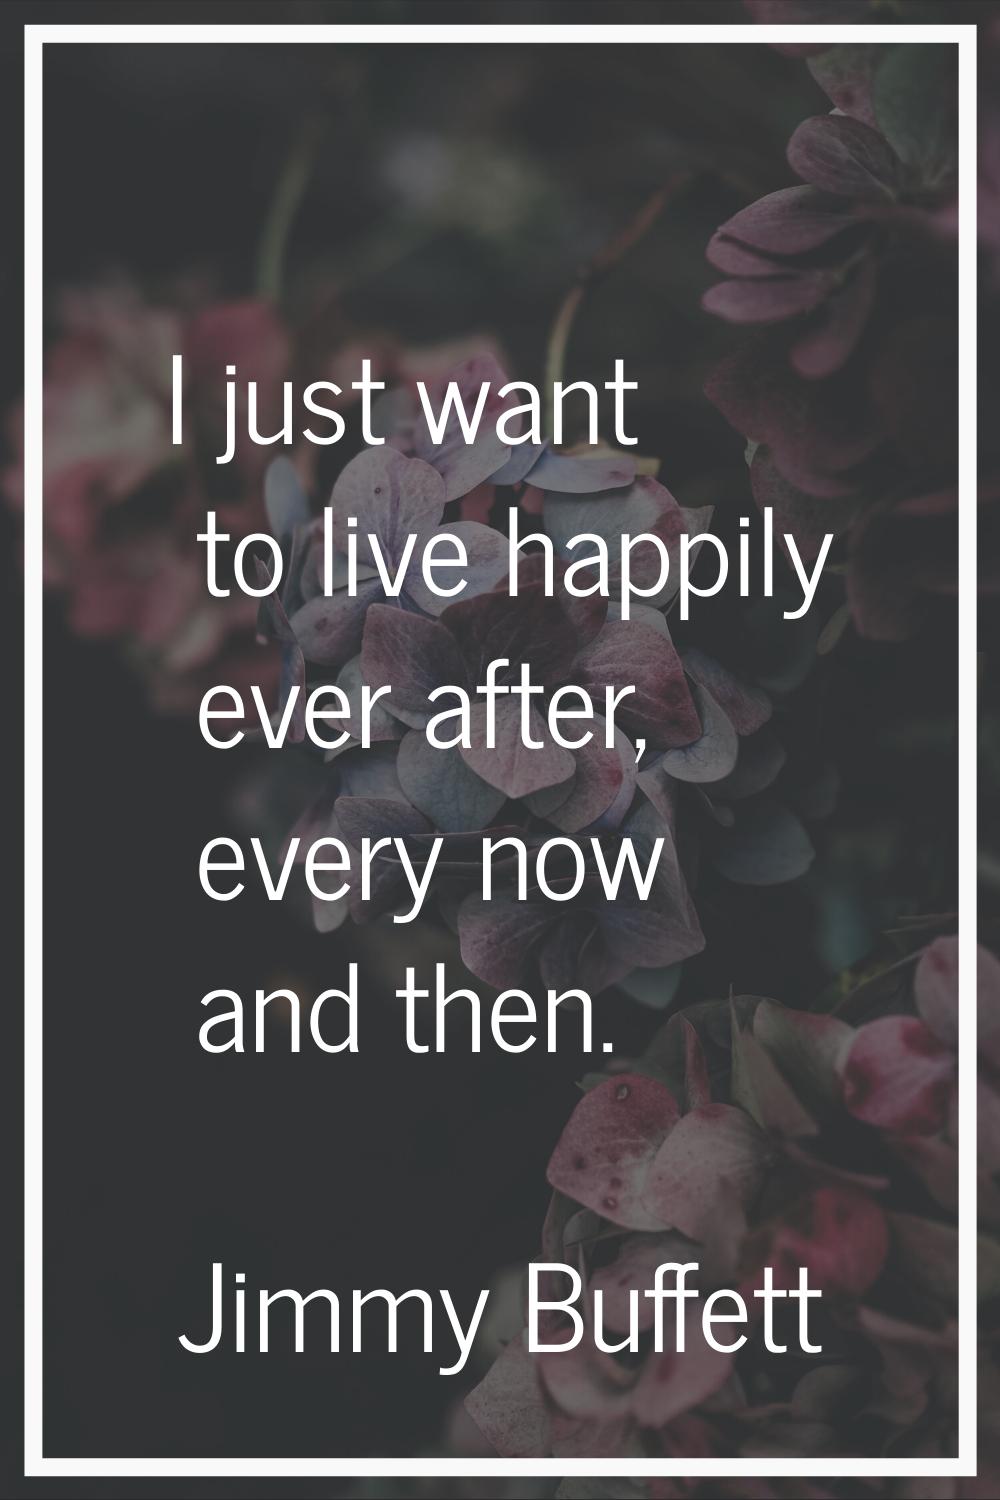 I just want to live happily ever after, every now and then.